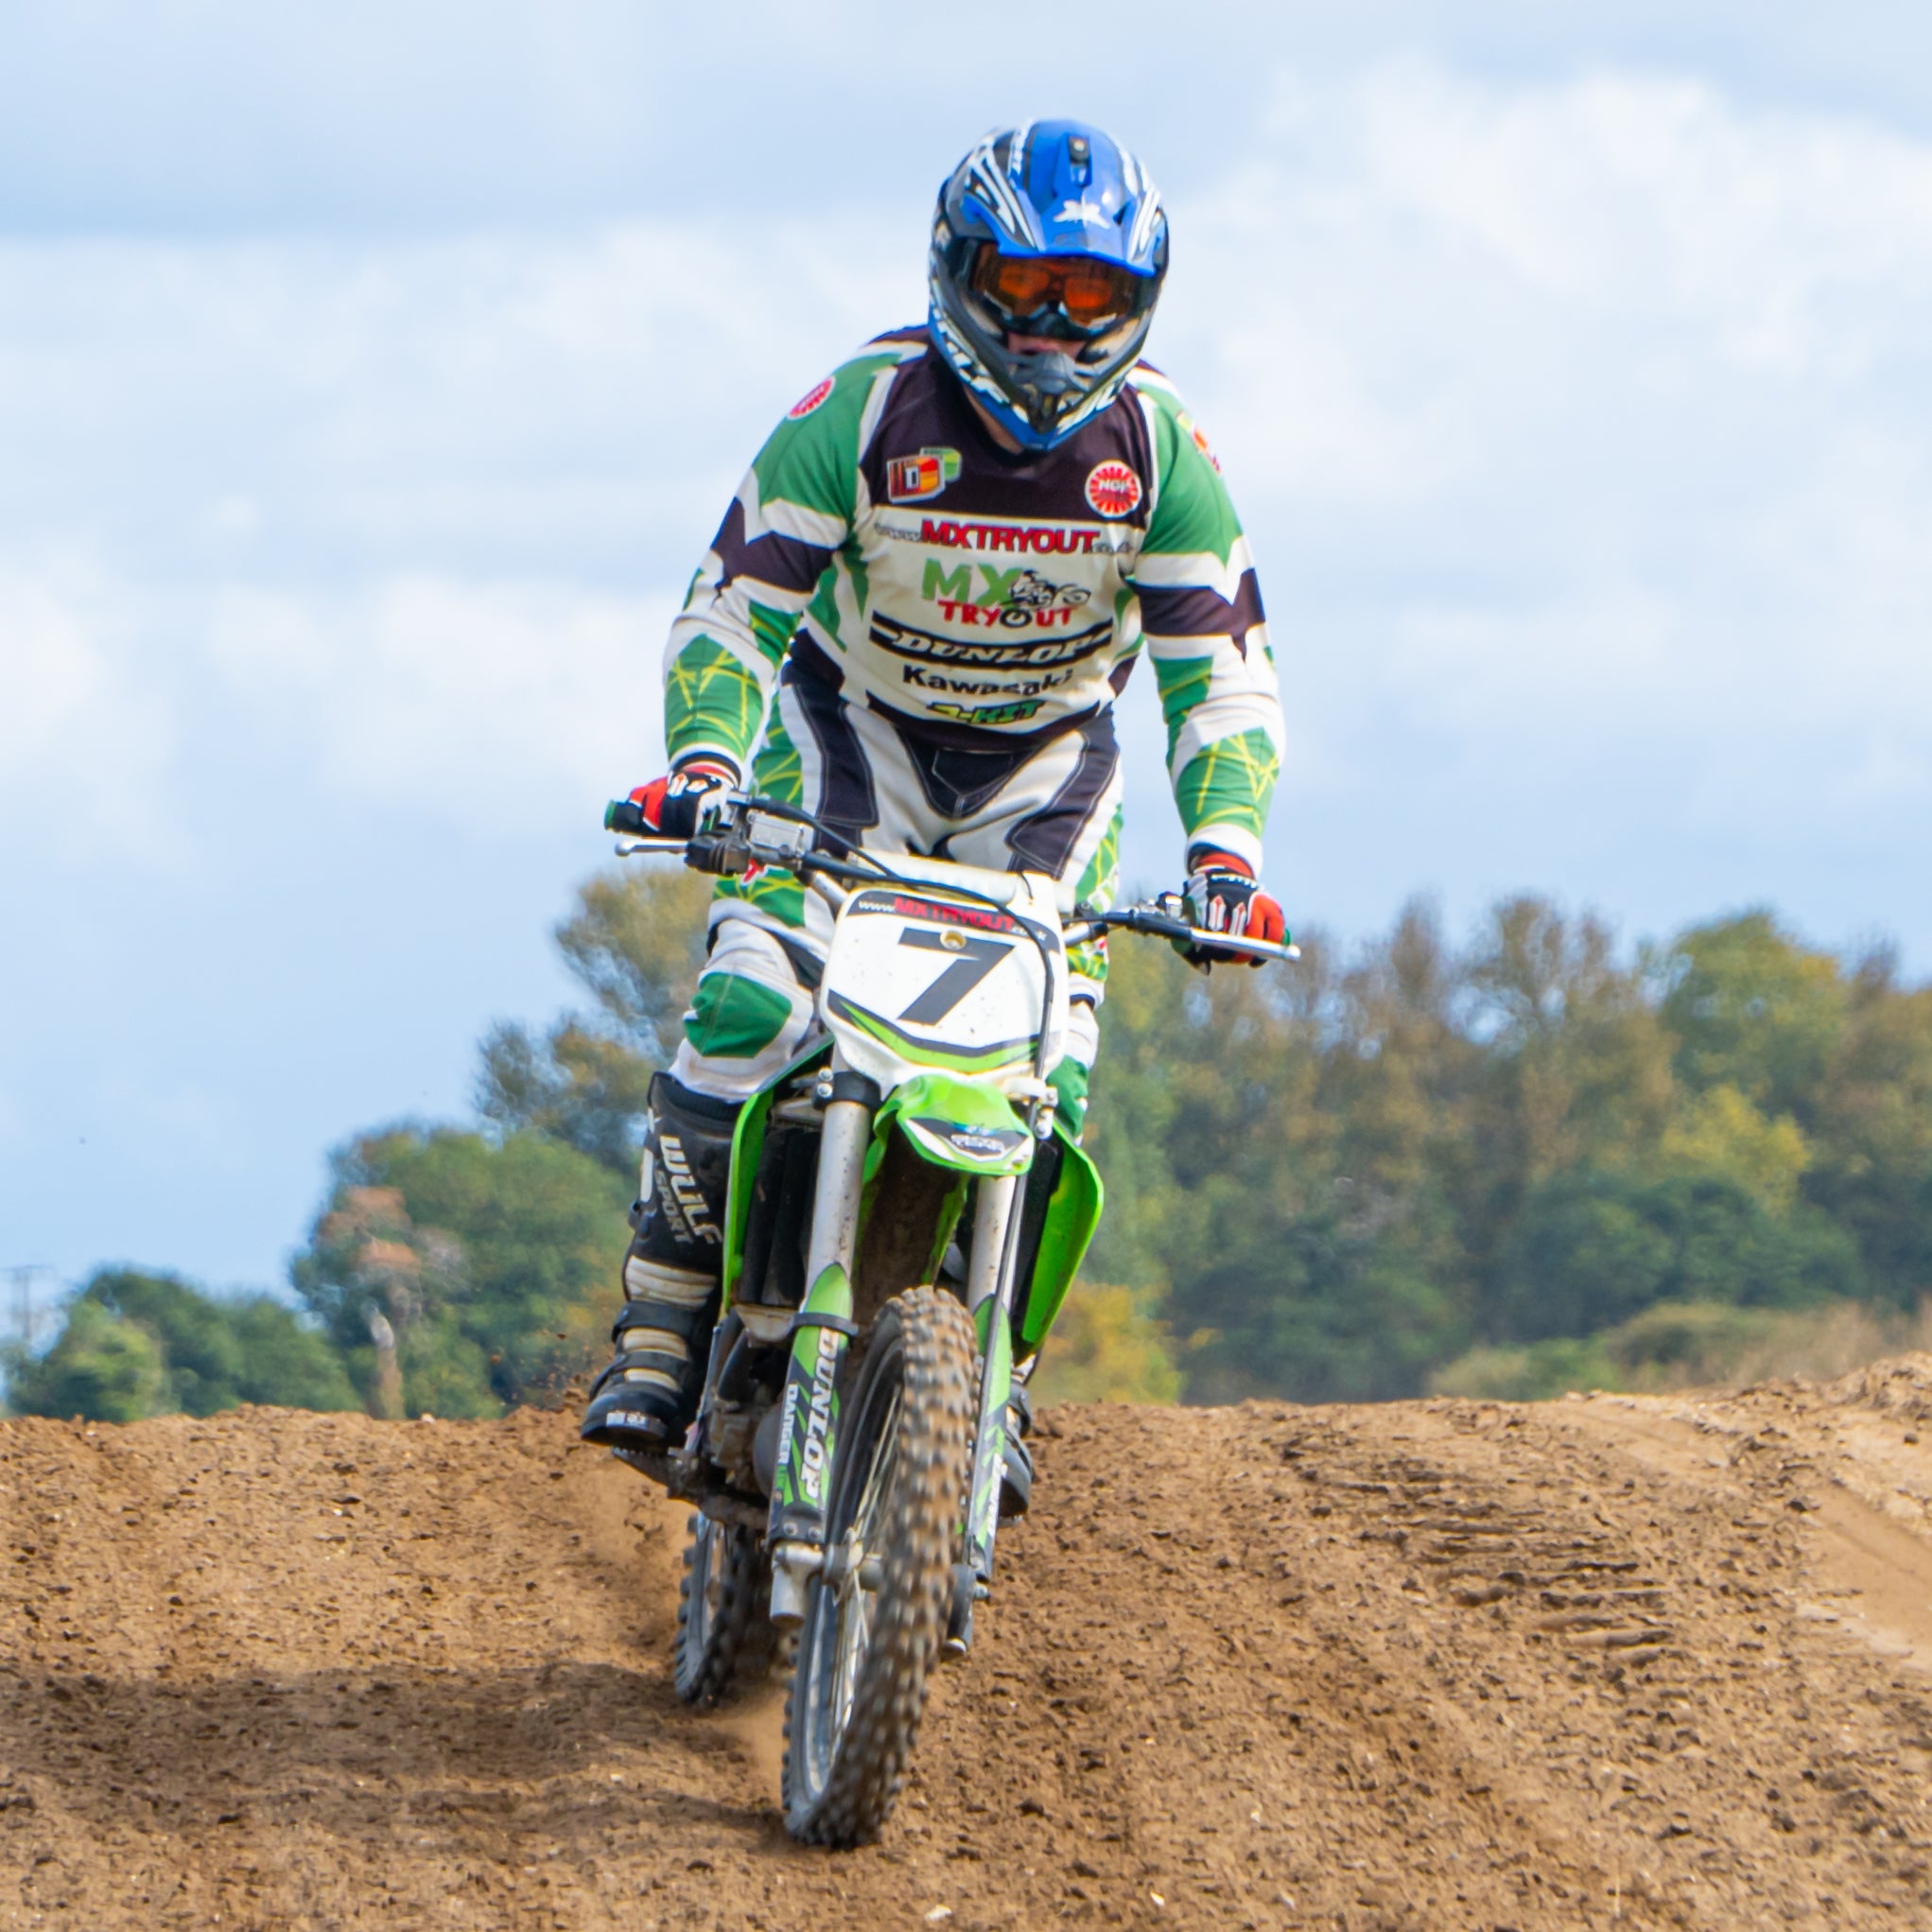 Adult 85cc big wheel off road motocross try out experience day, ideal for adult beginners. Motocross dirt bike bike, all protective clothing and tuition provided by qualified trainers